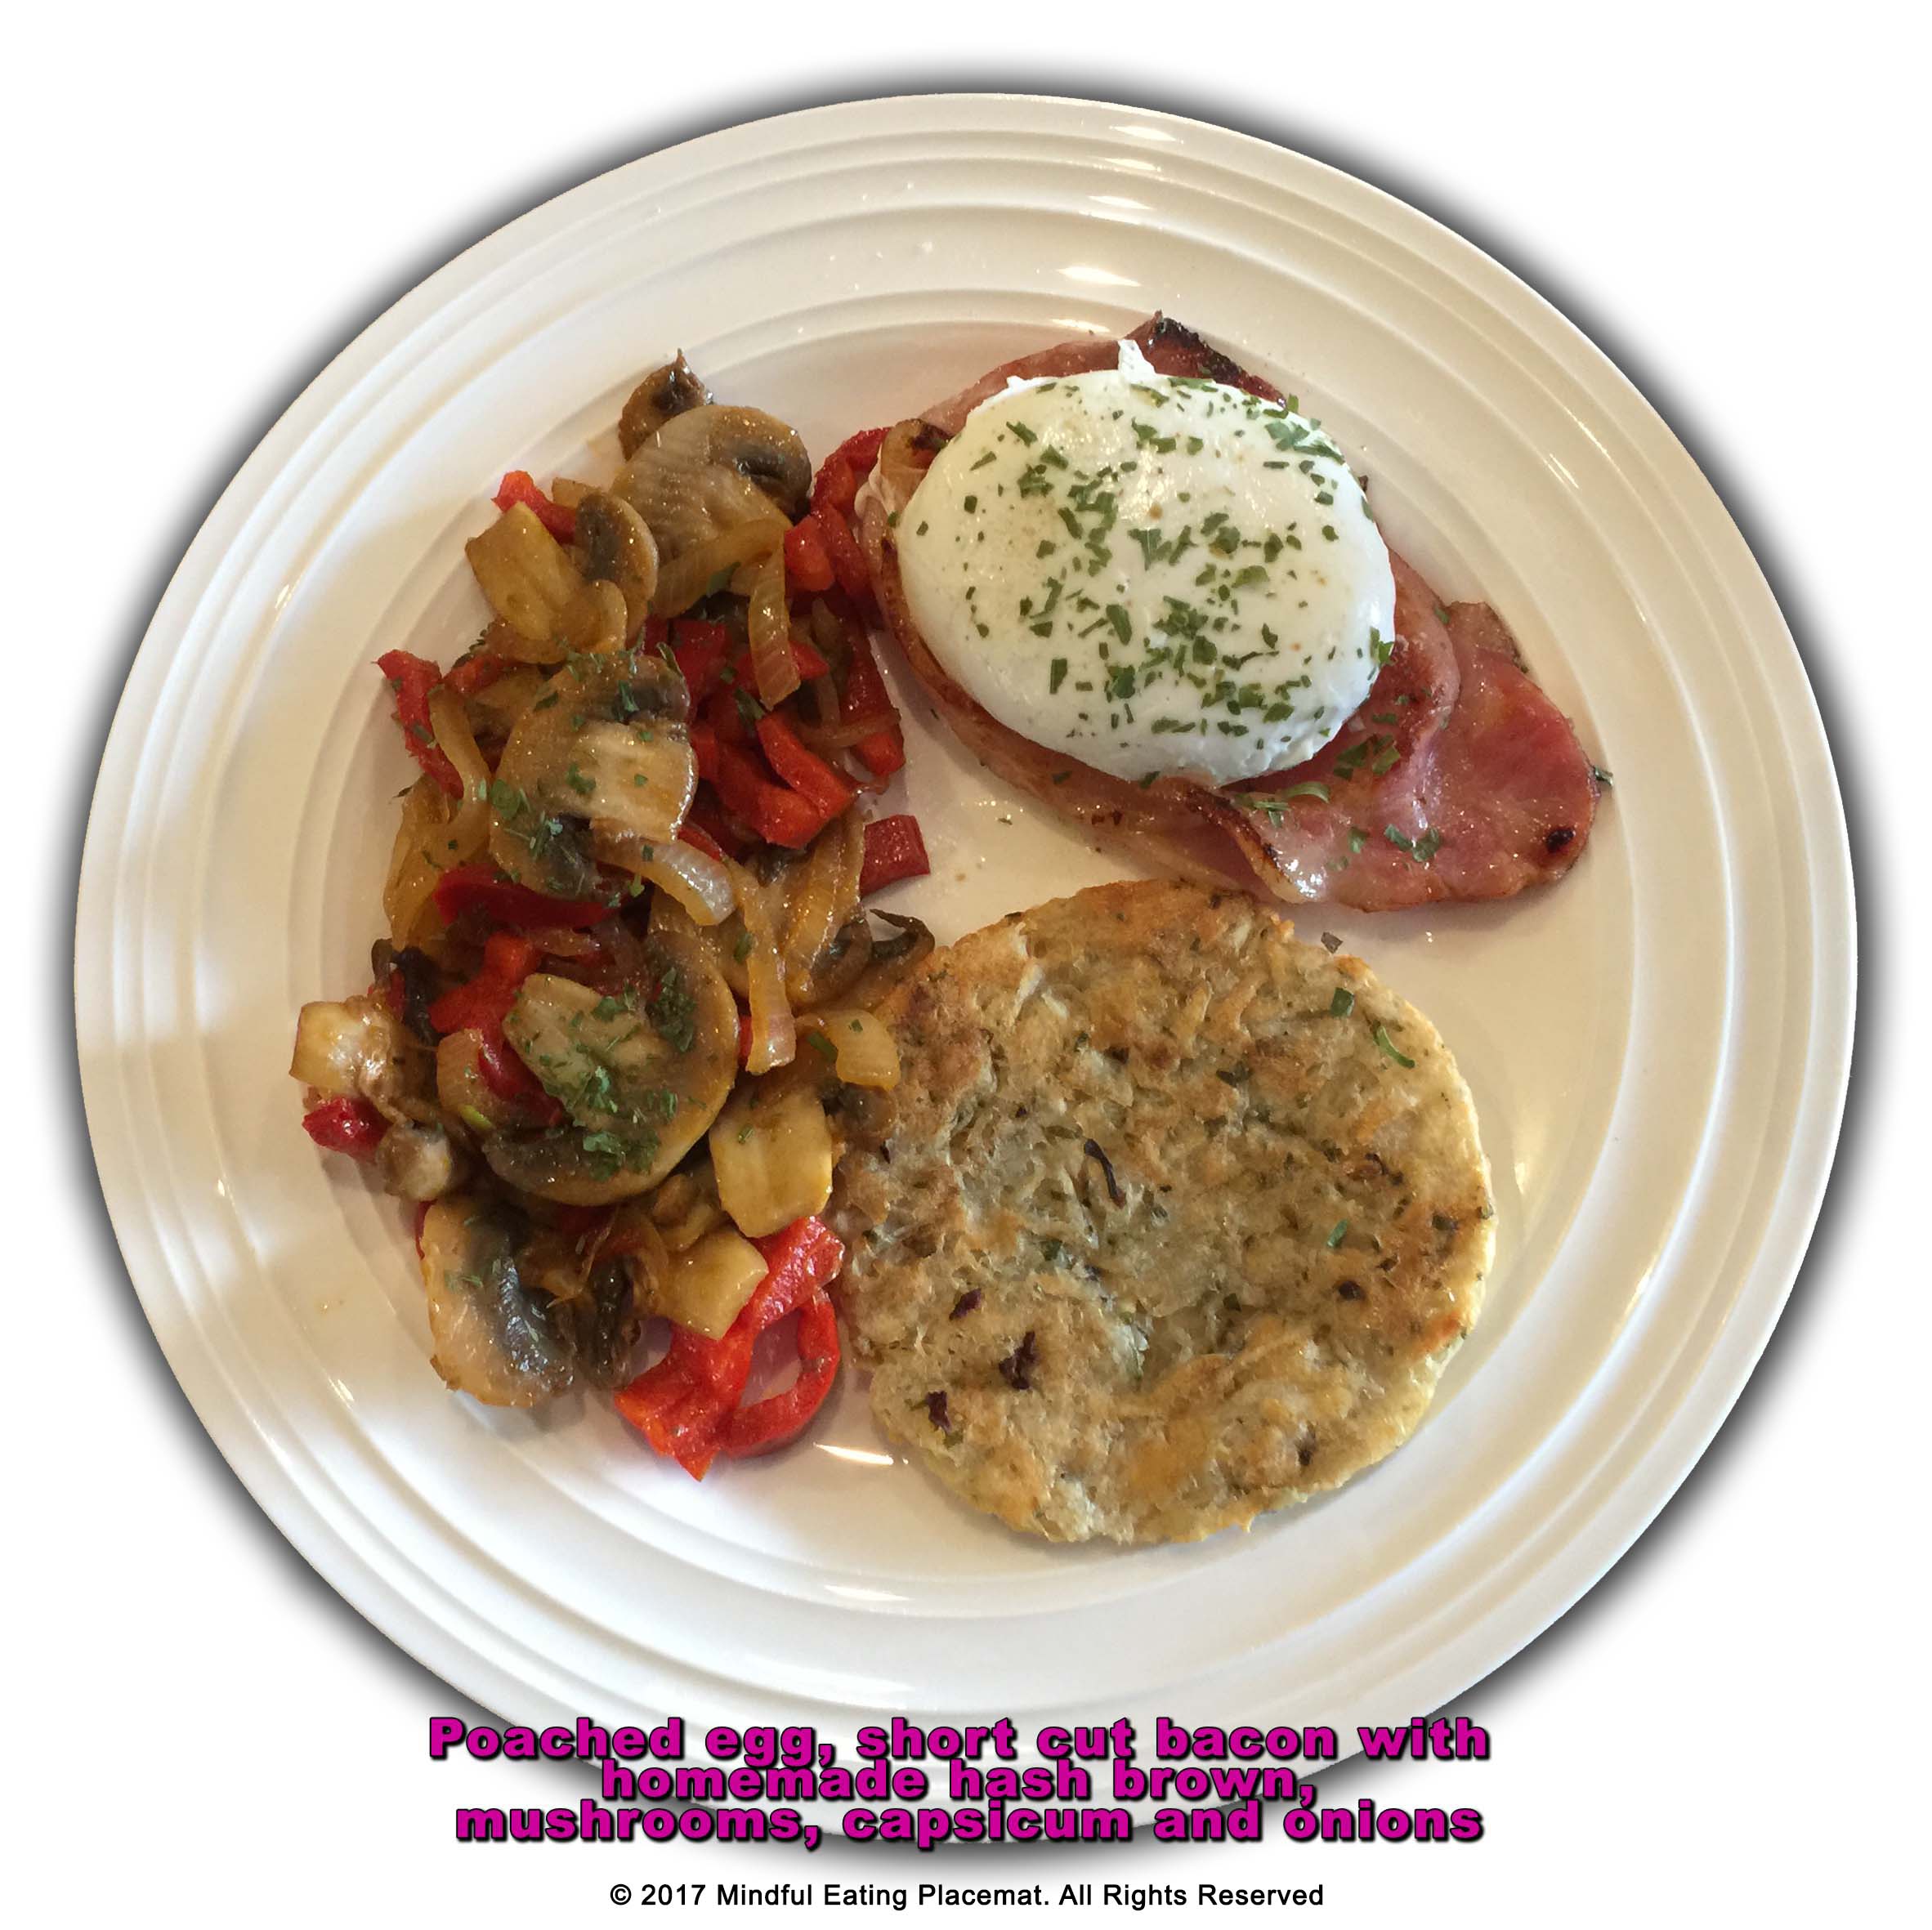 Poached egg, slice bacon, hashbrown with mushrooms, capsicum and onion